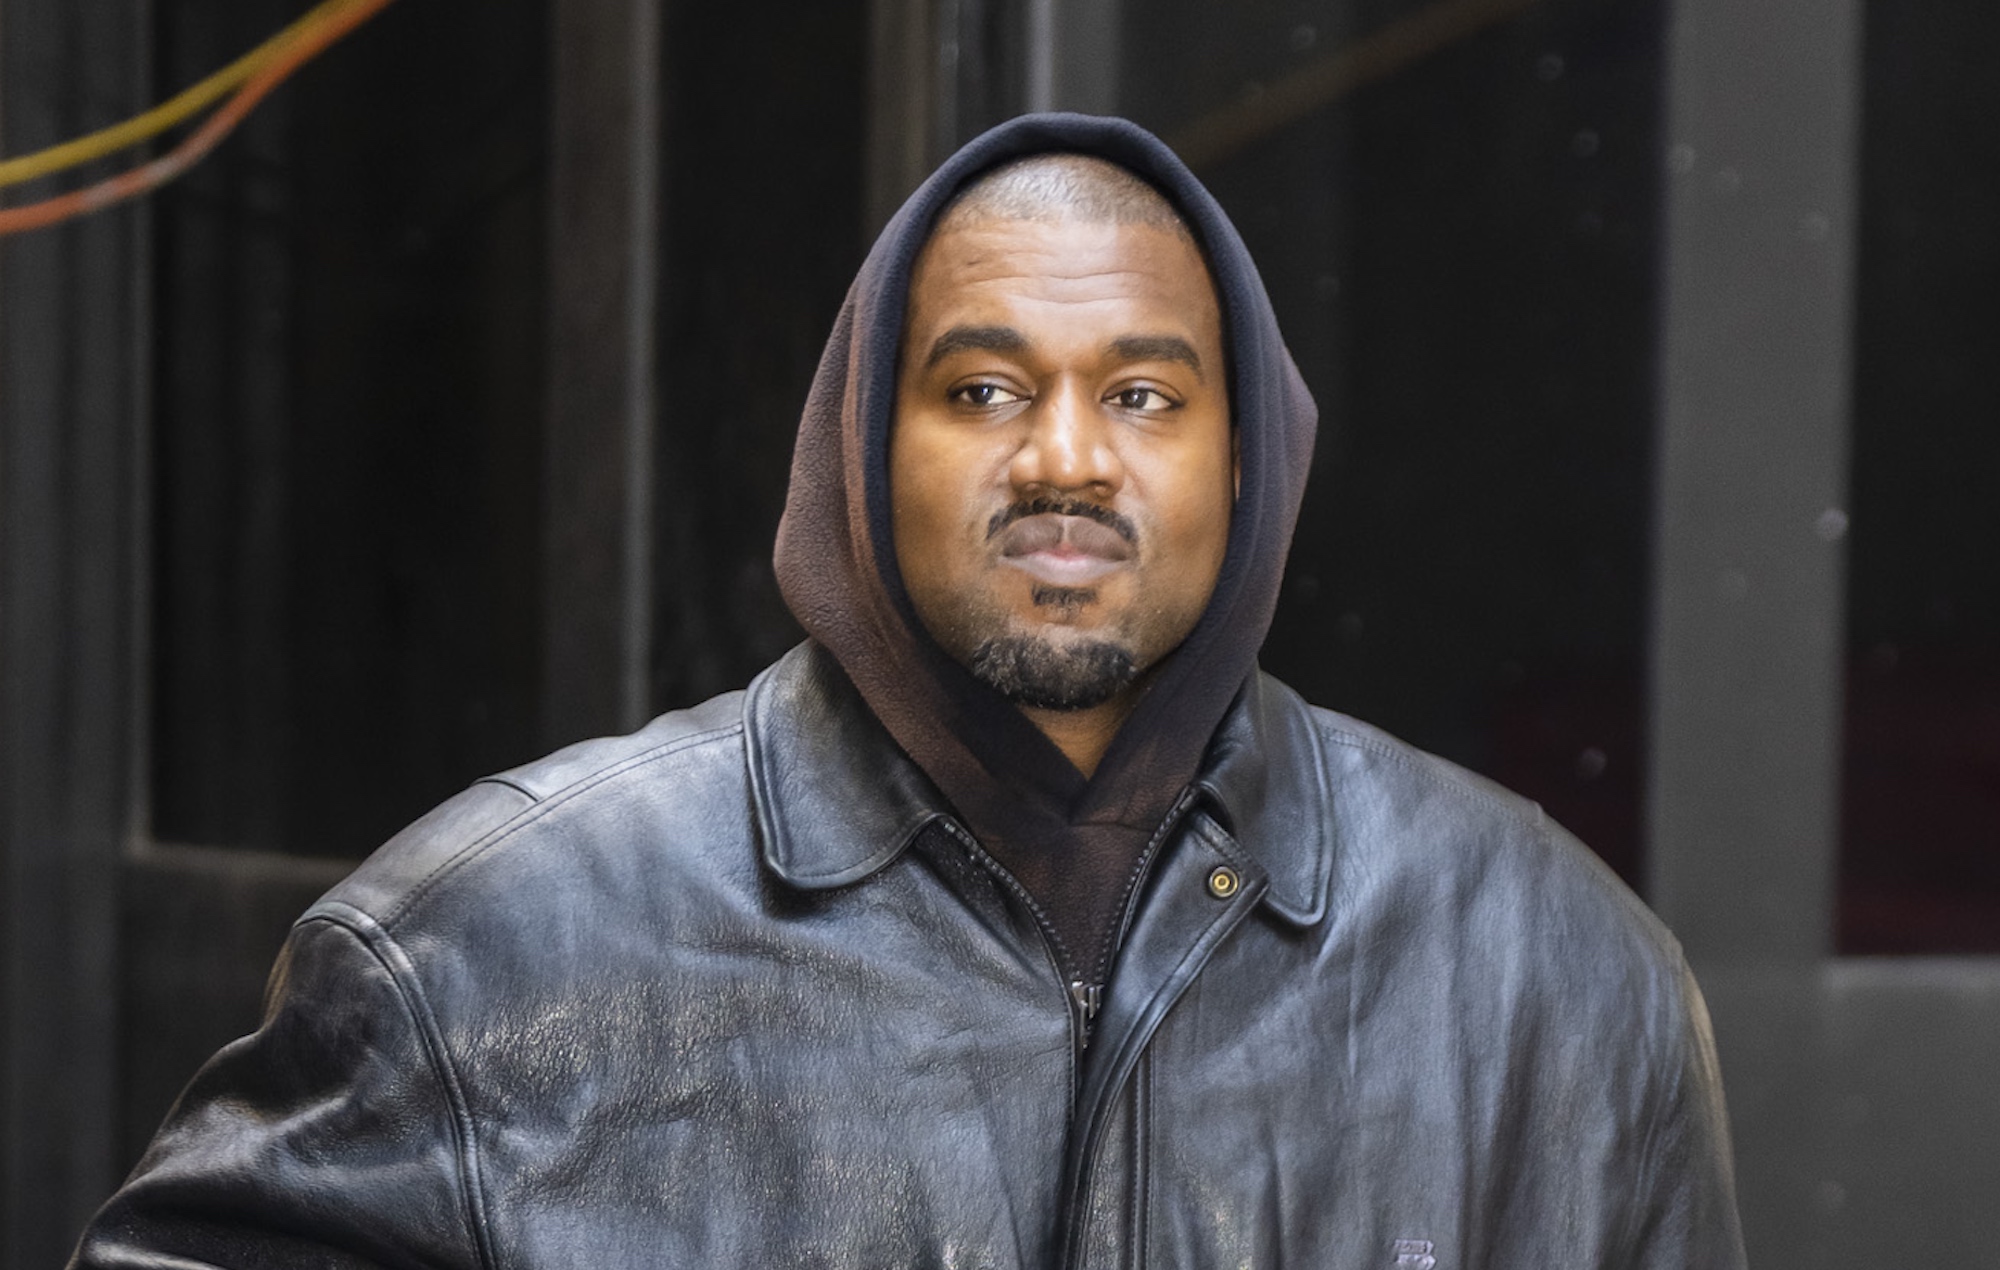 Kanye West apologizes for his racist and anti-Semitic comments